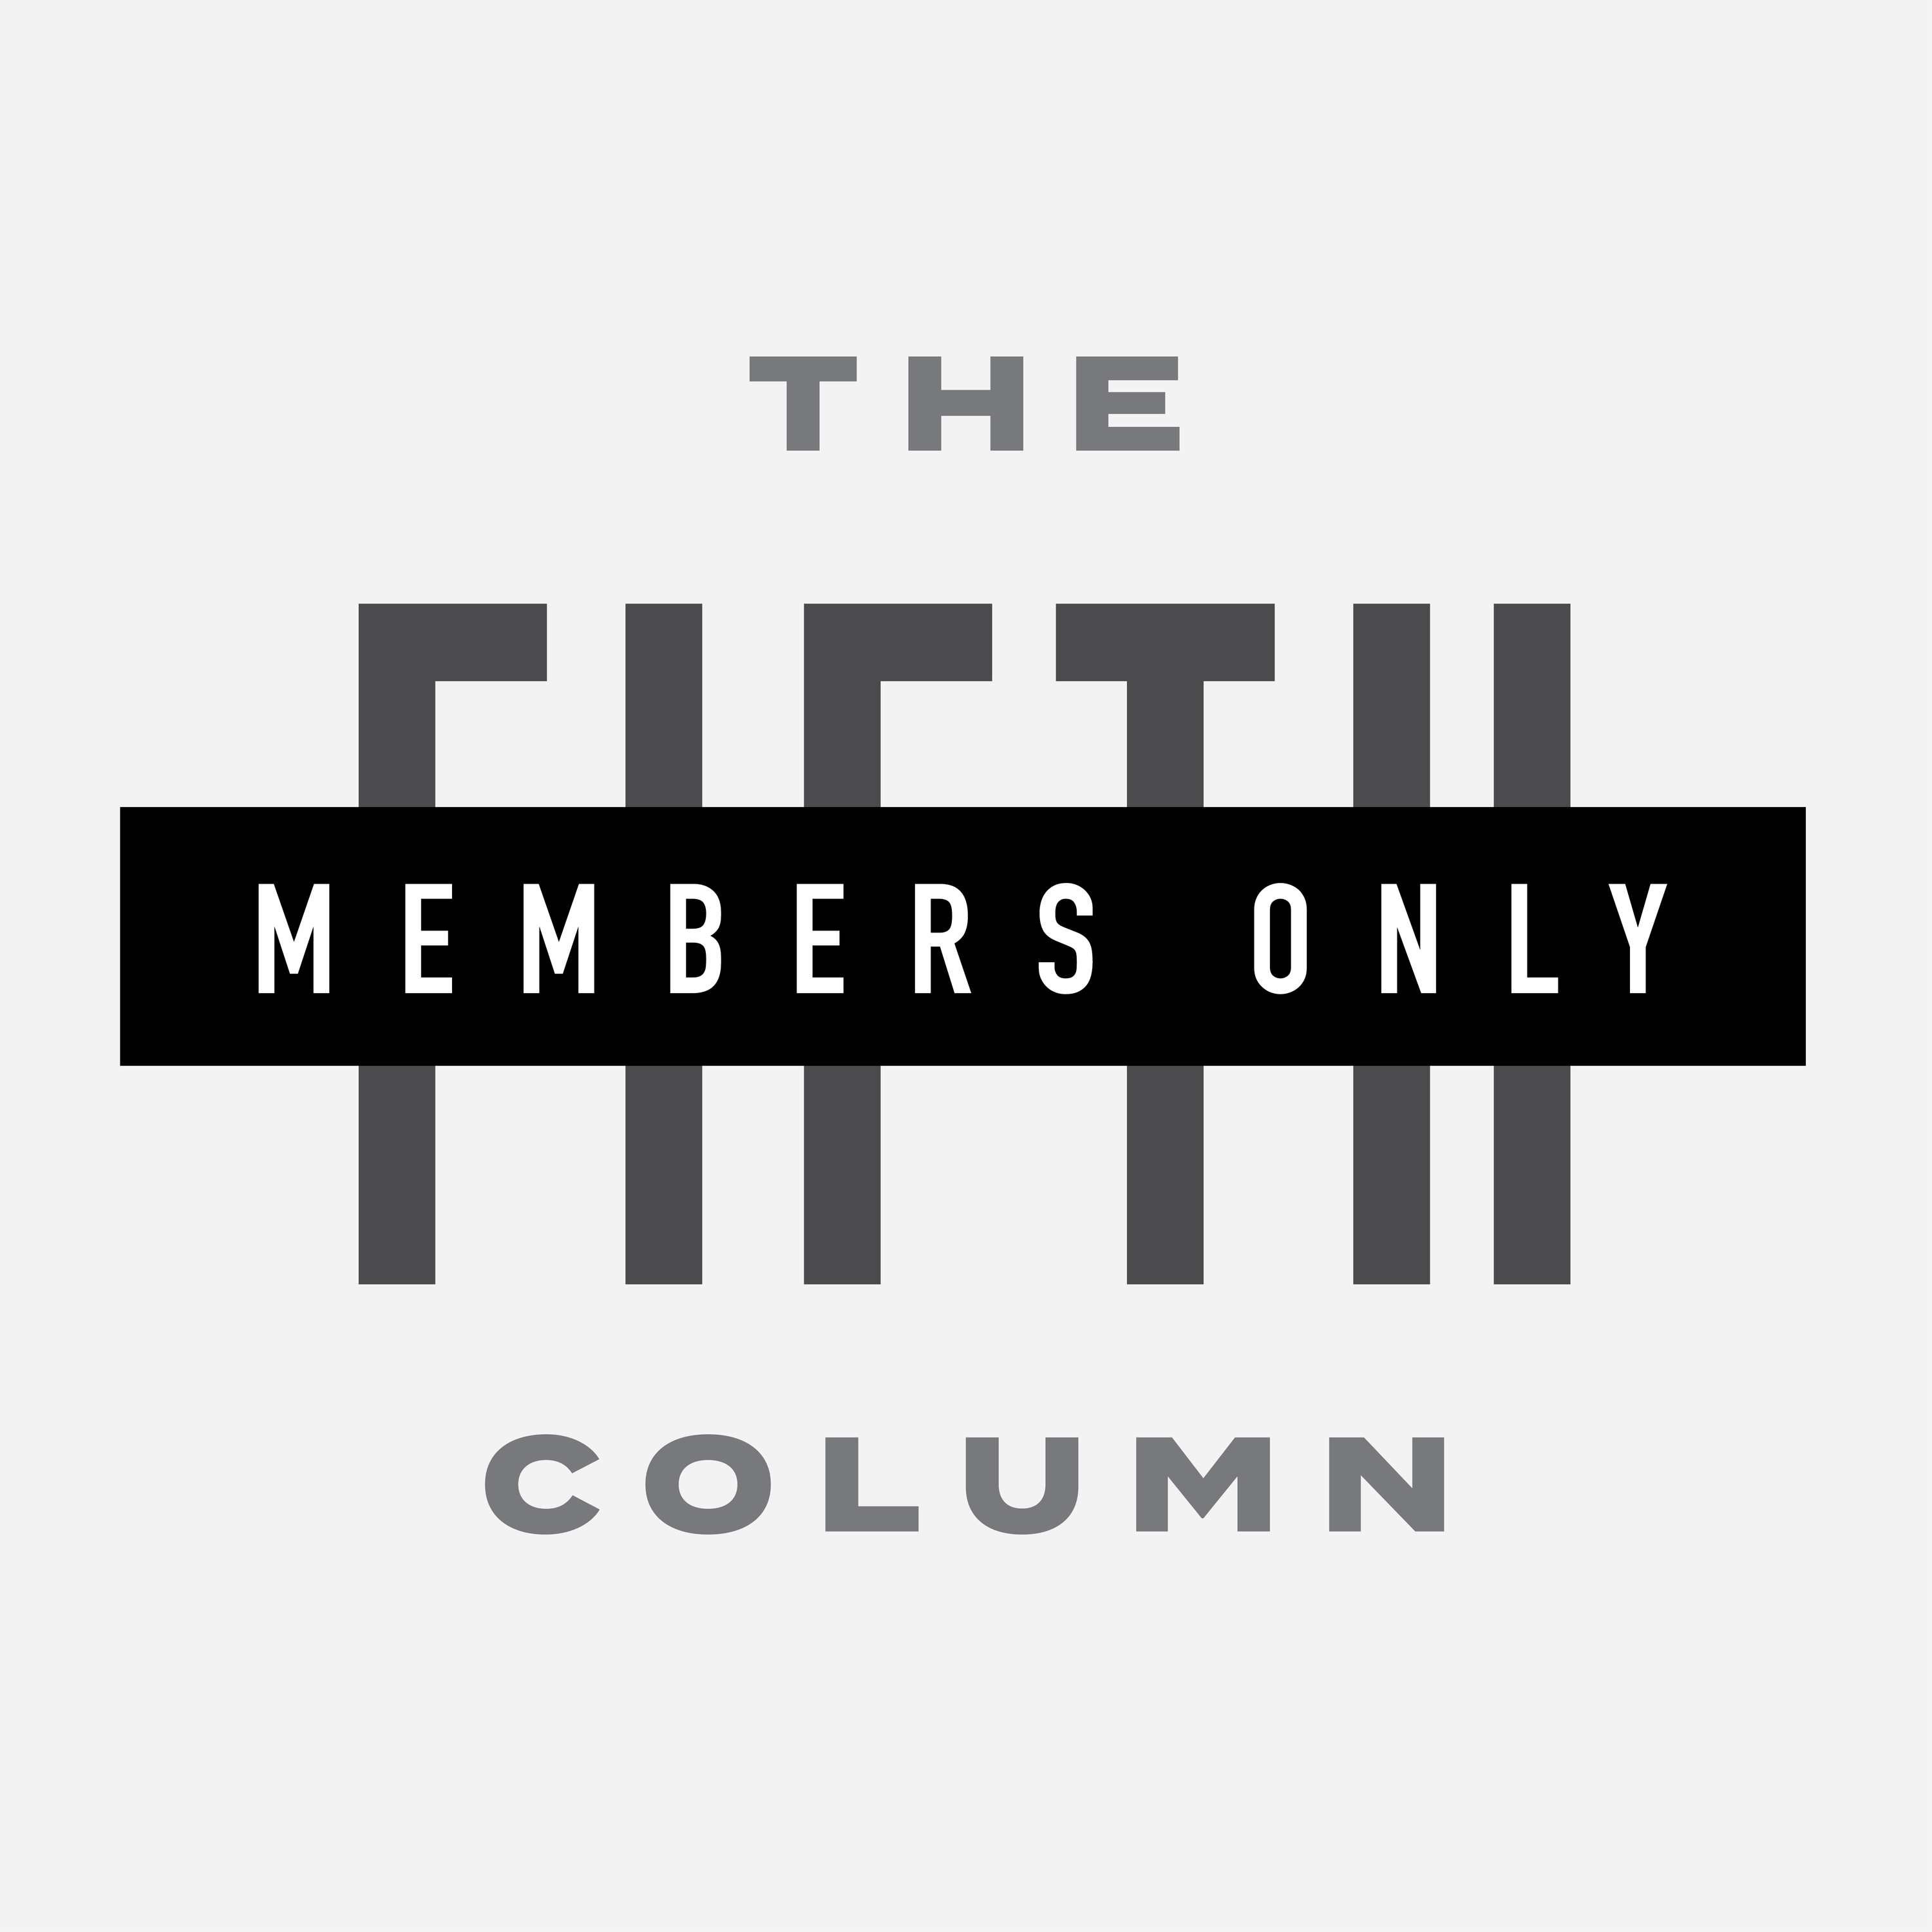 Members Only #219 - Pronunciation Racism and the Triumph of Mentally Ill